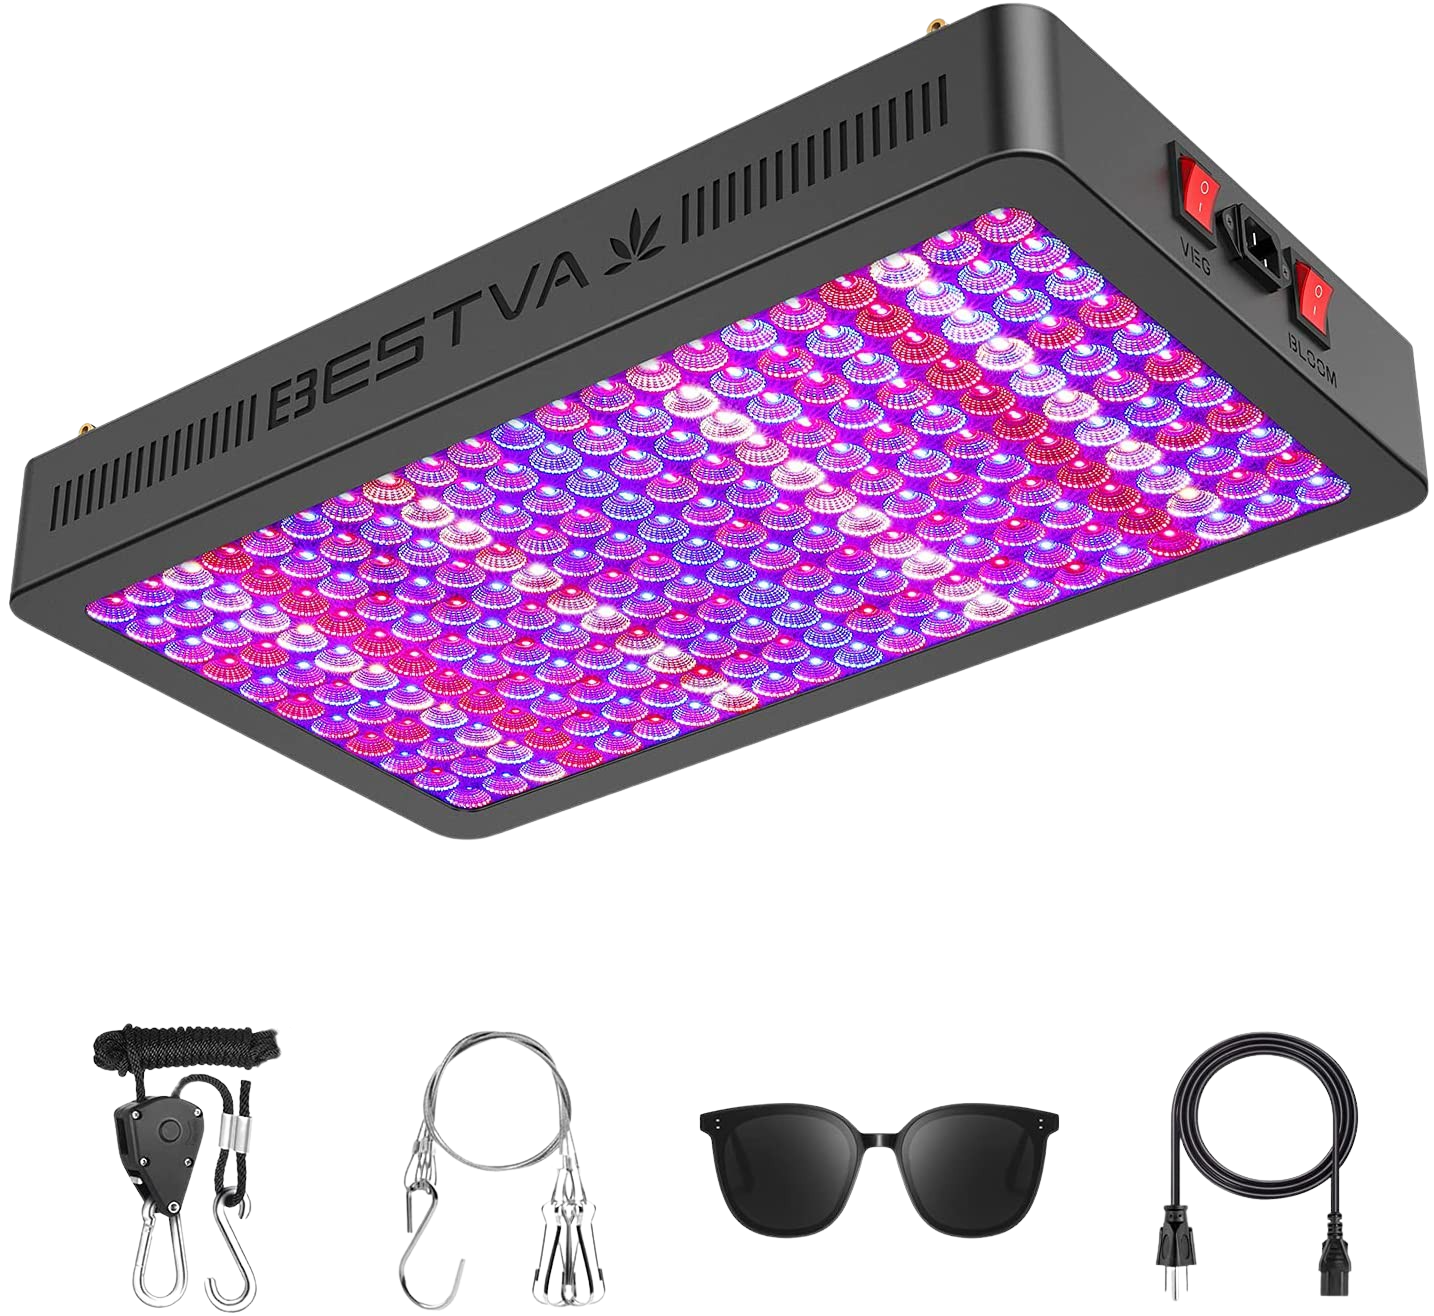 BESTVA 4000W Double Chips LED Grow Light Full Spectrum 12 Band Grown Lamp for Greenhouse Hydroponic Indoor Veg and Flower New